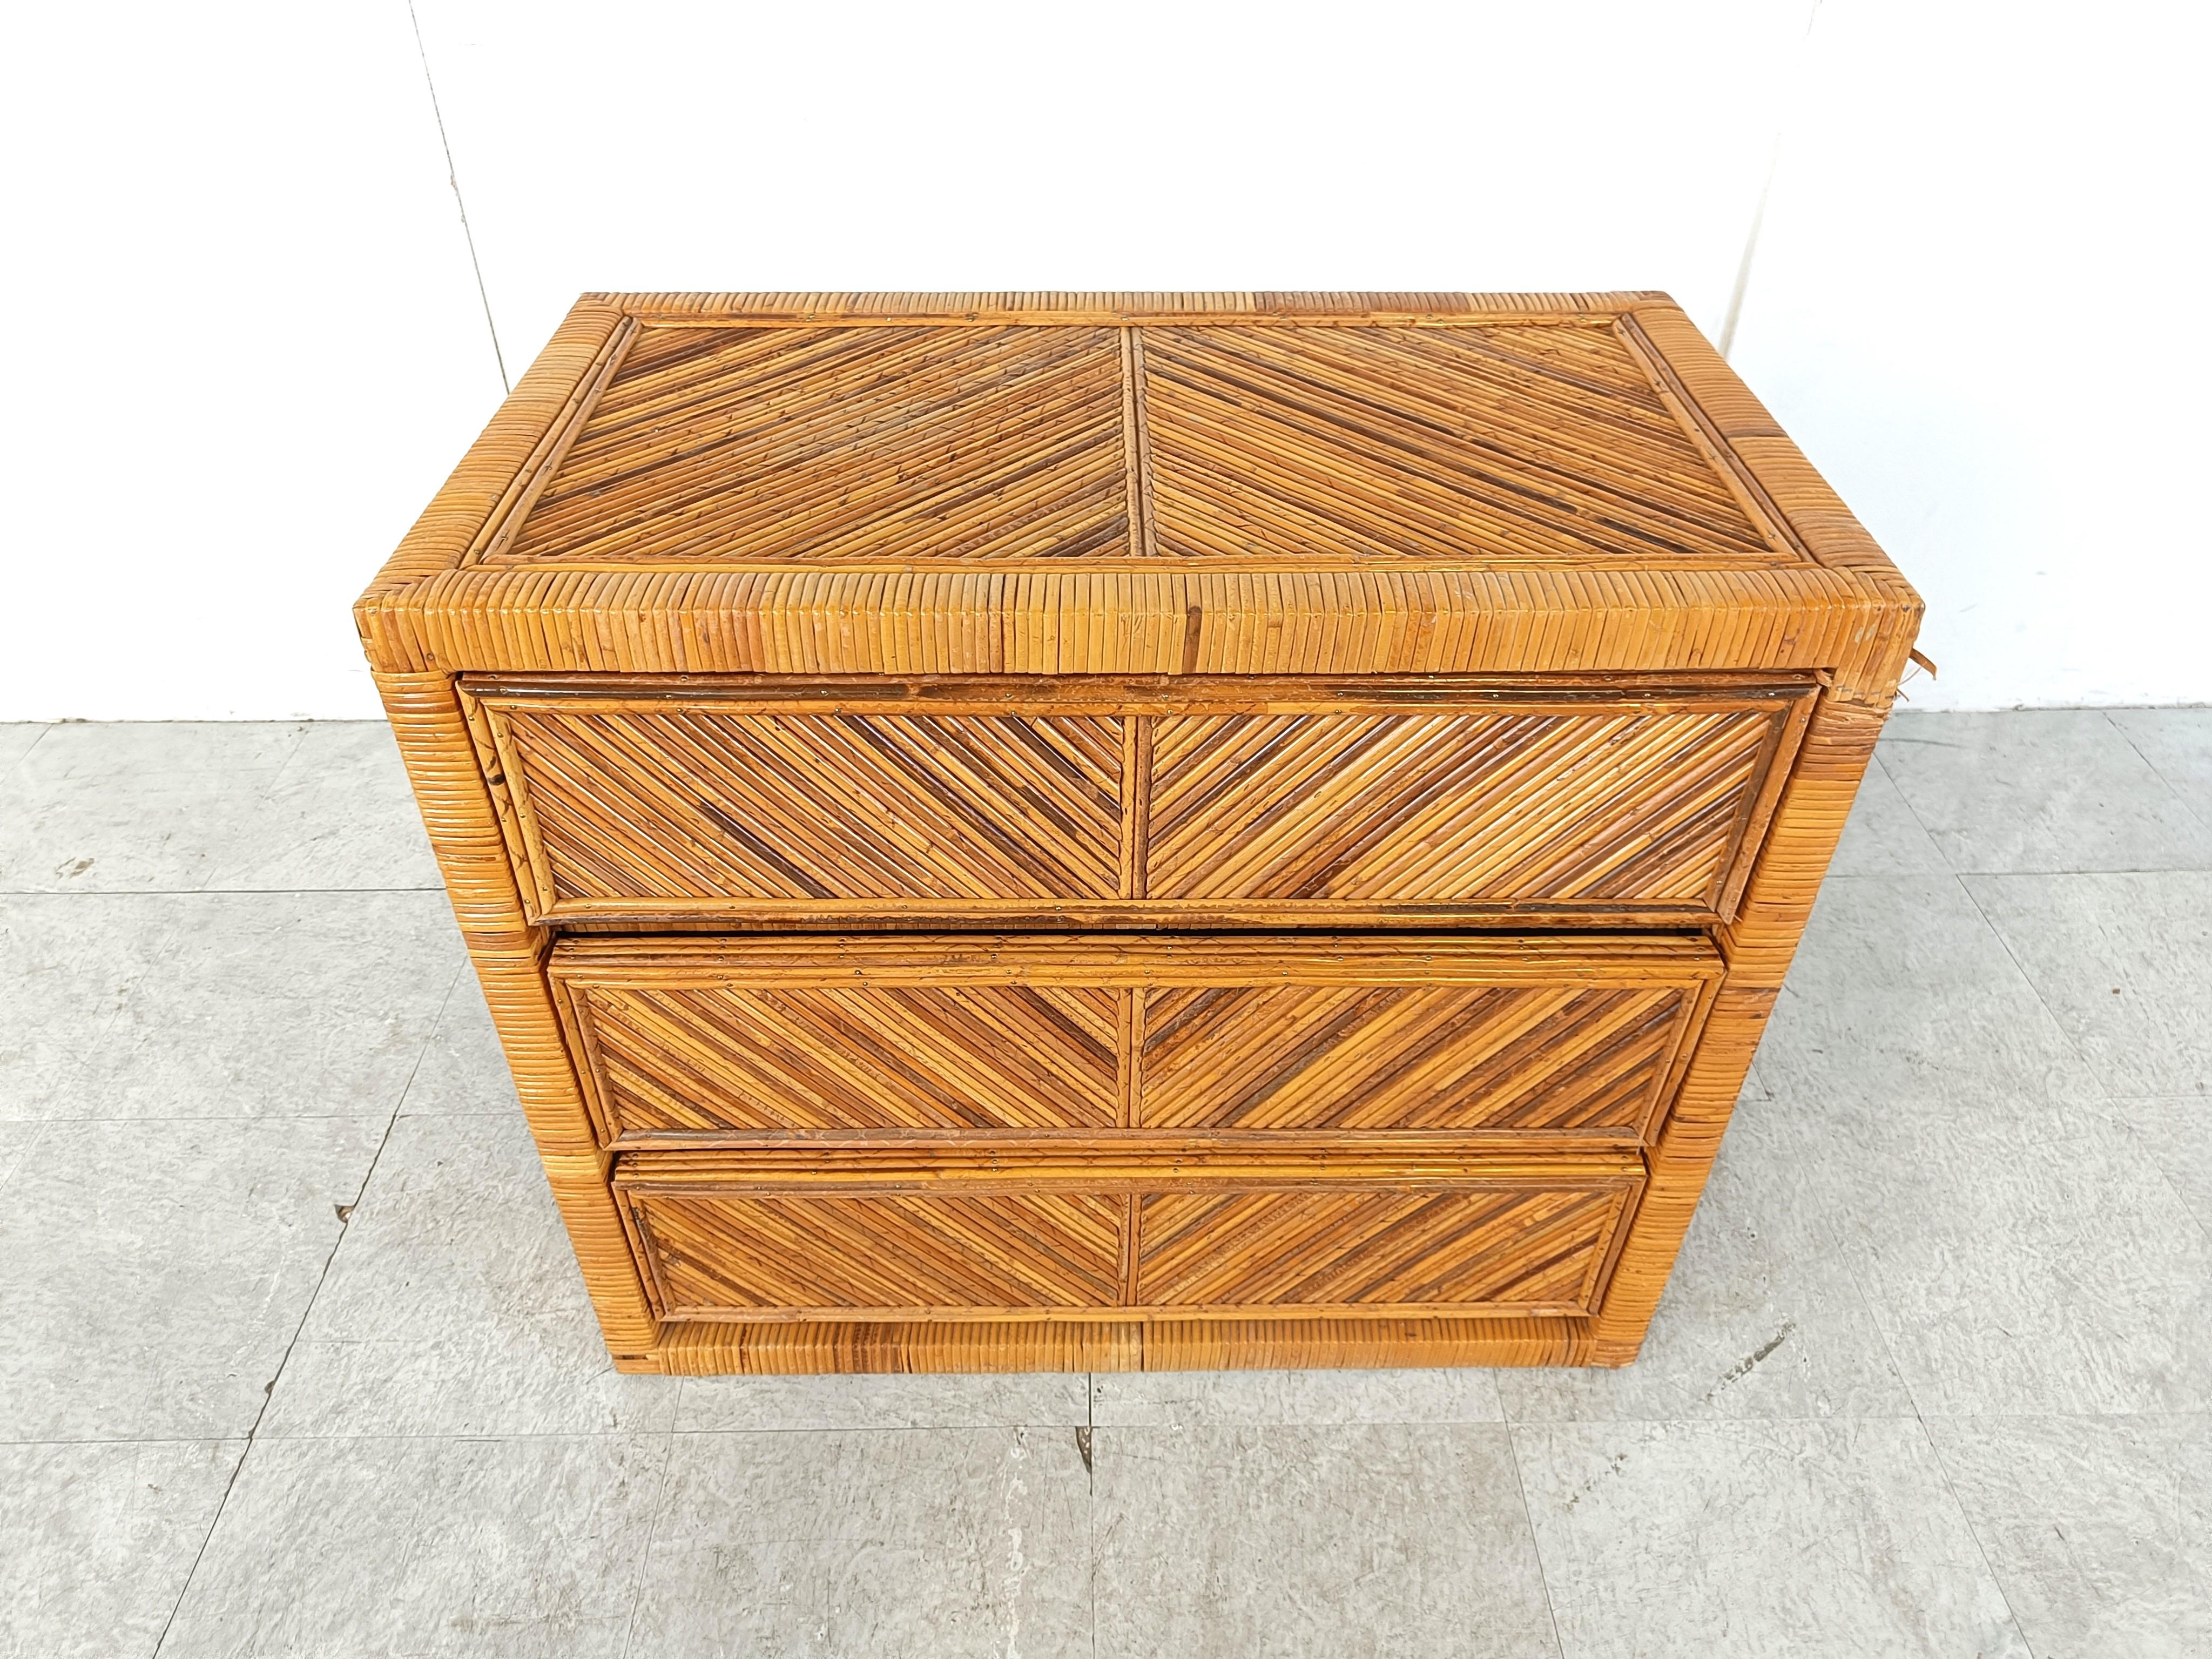 Elegant wooden and rattan chest of drawers/cabinet with 3 drawers.

Good condition

Ideal storage piece for a bathroom or hallway.

Very good quality.

1970s - France

Dimensions:

Lenght: 77cm/30.31